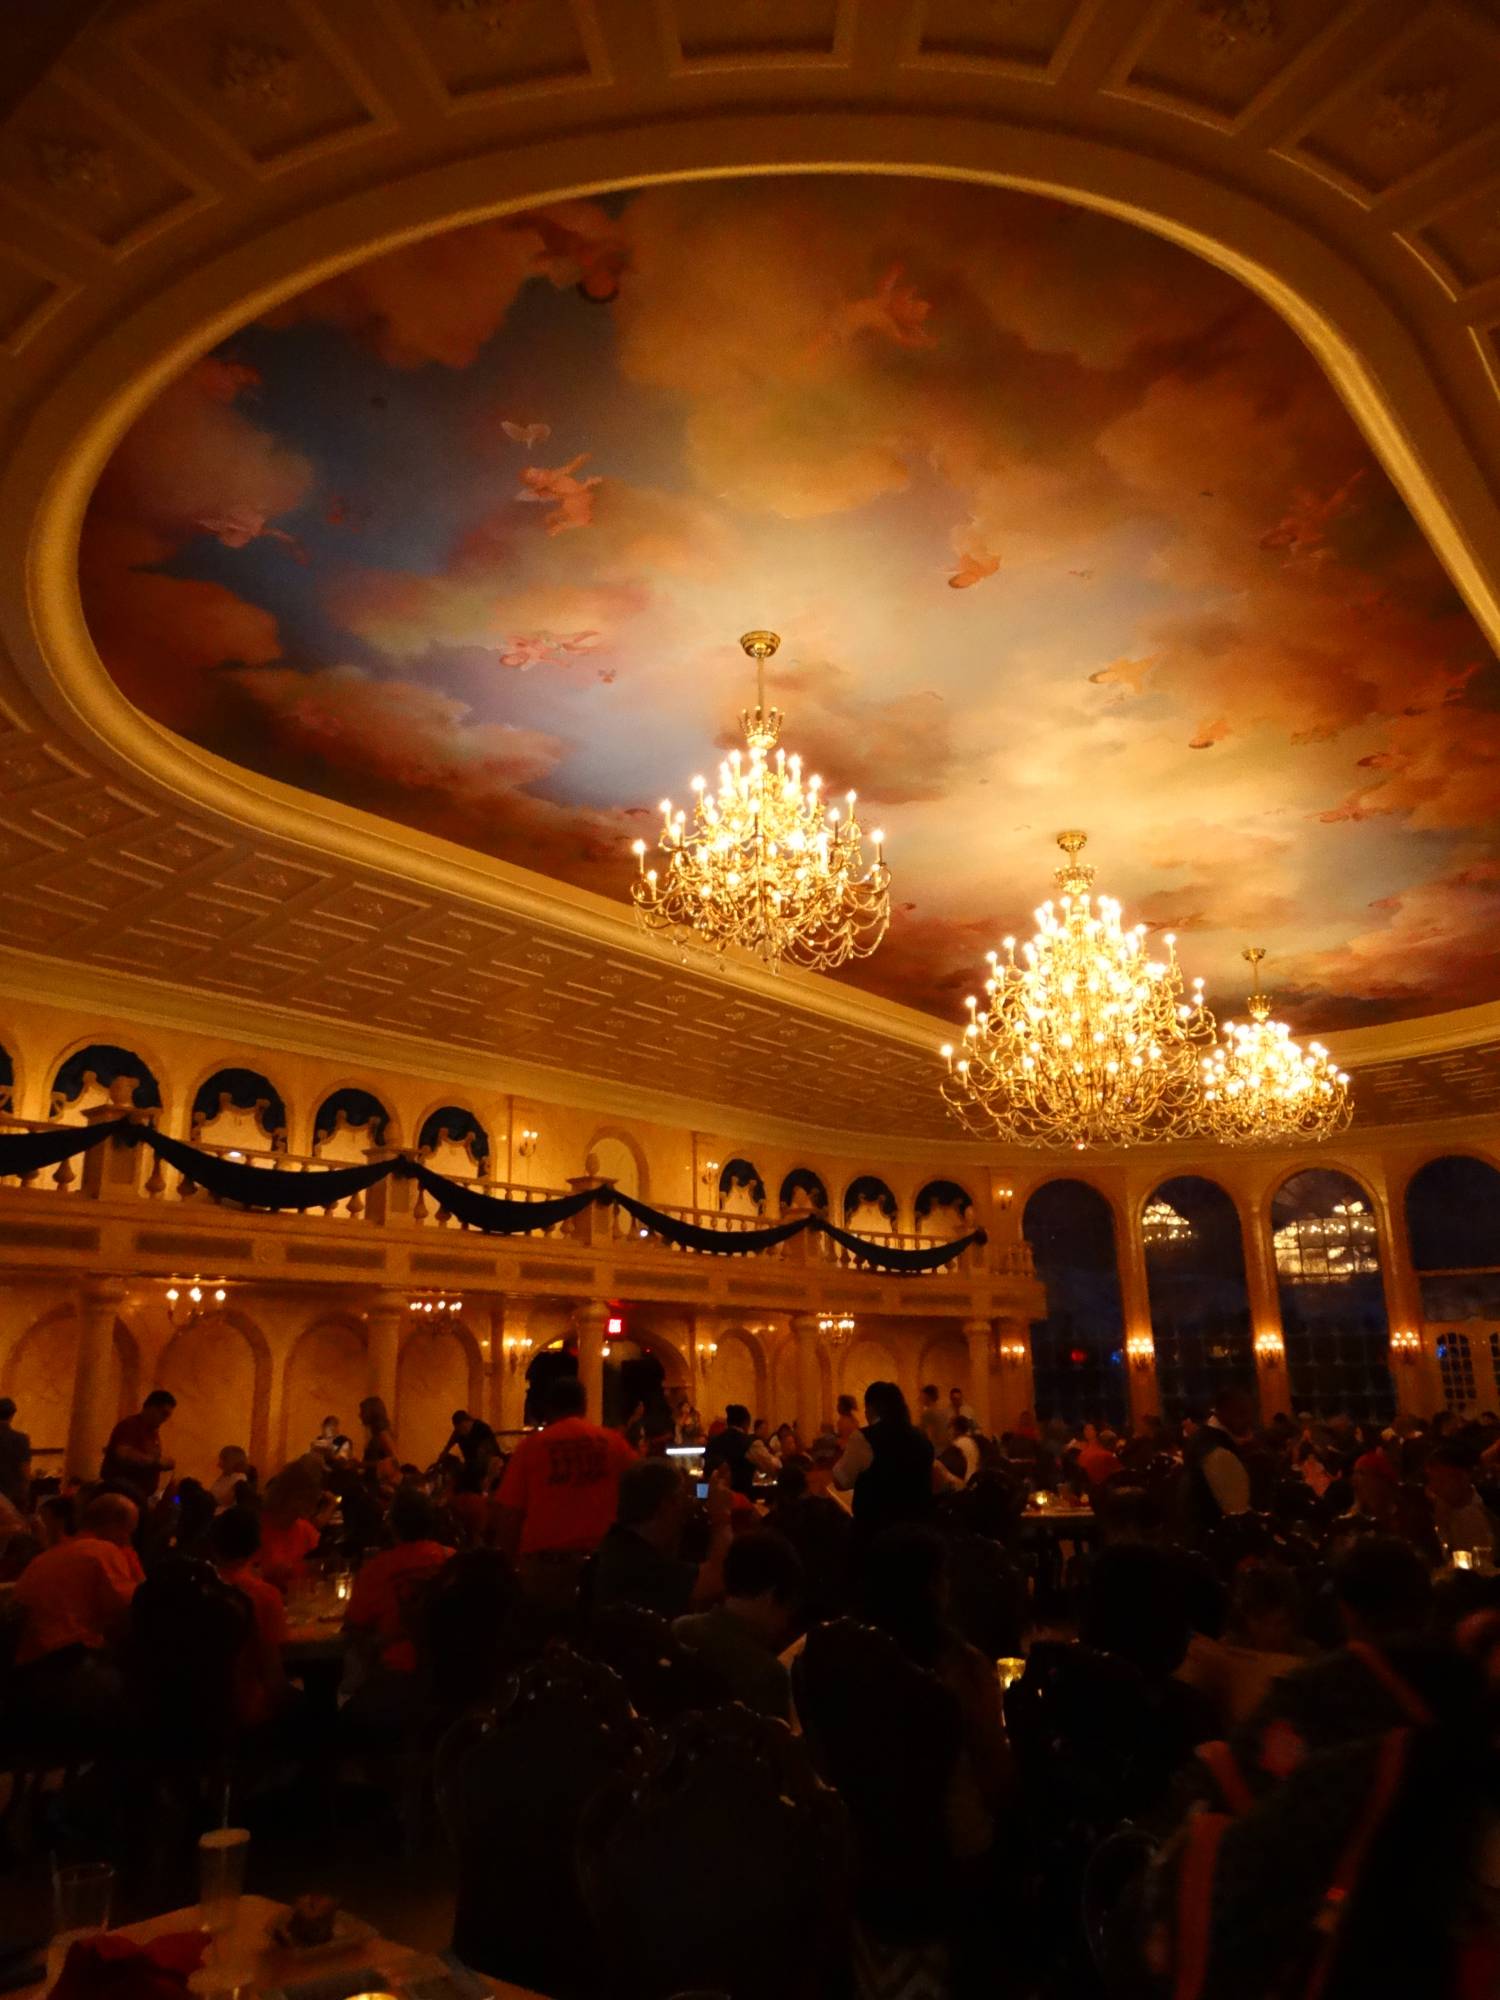 Enjoy wine with your meal at Be Our Guest in the New Fantasyland at Walt Disney World |PassPorter.com